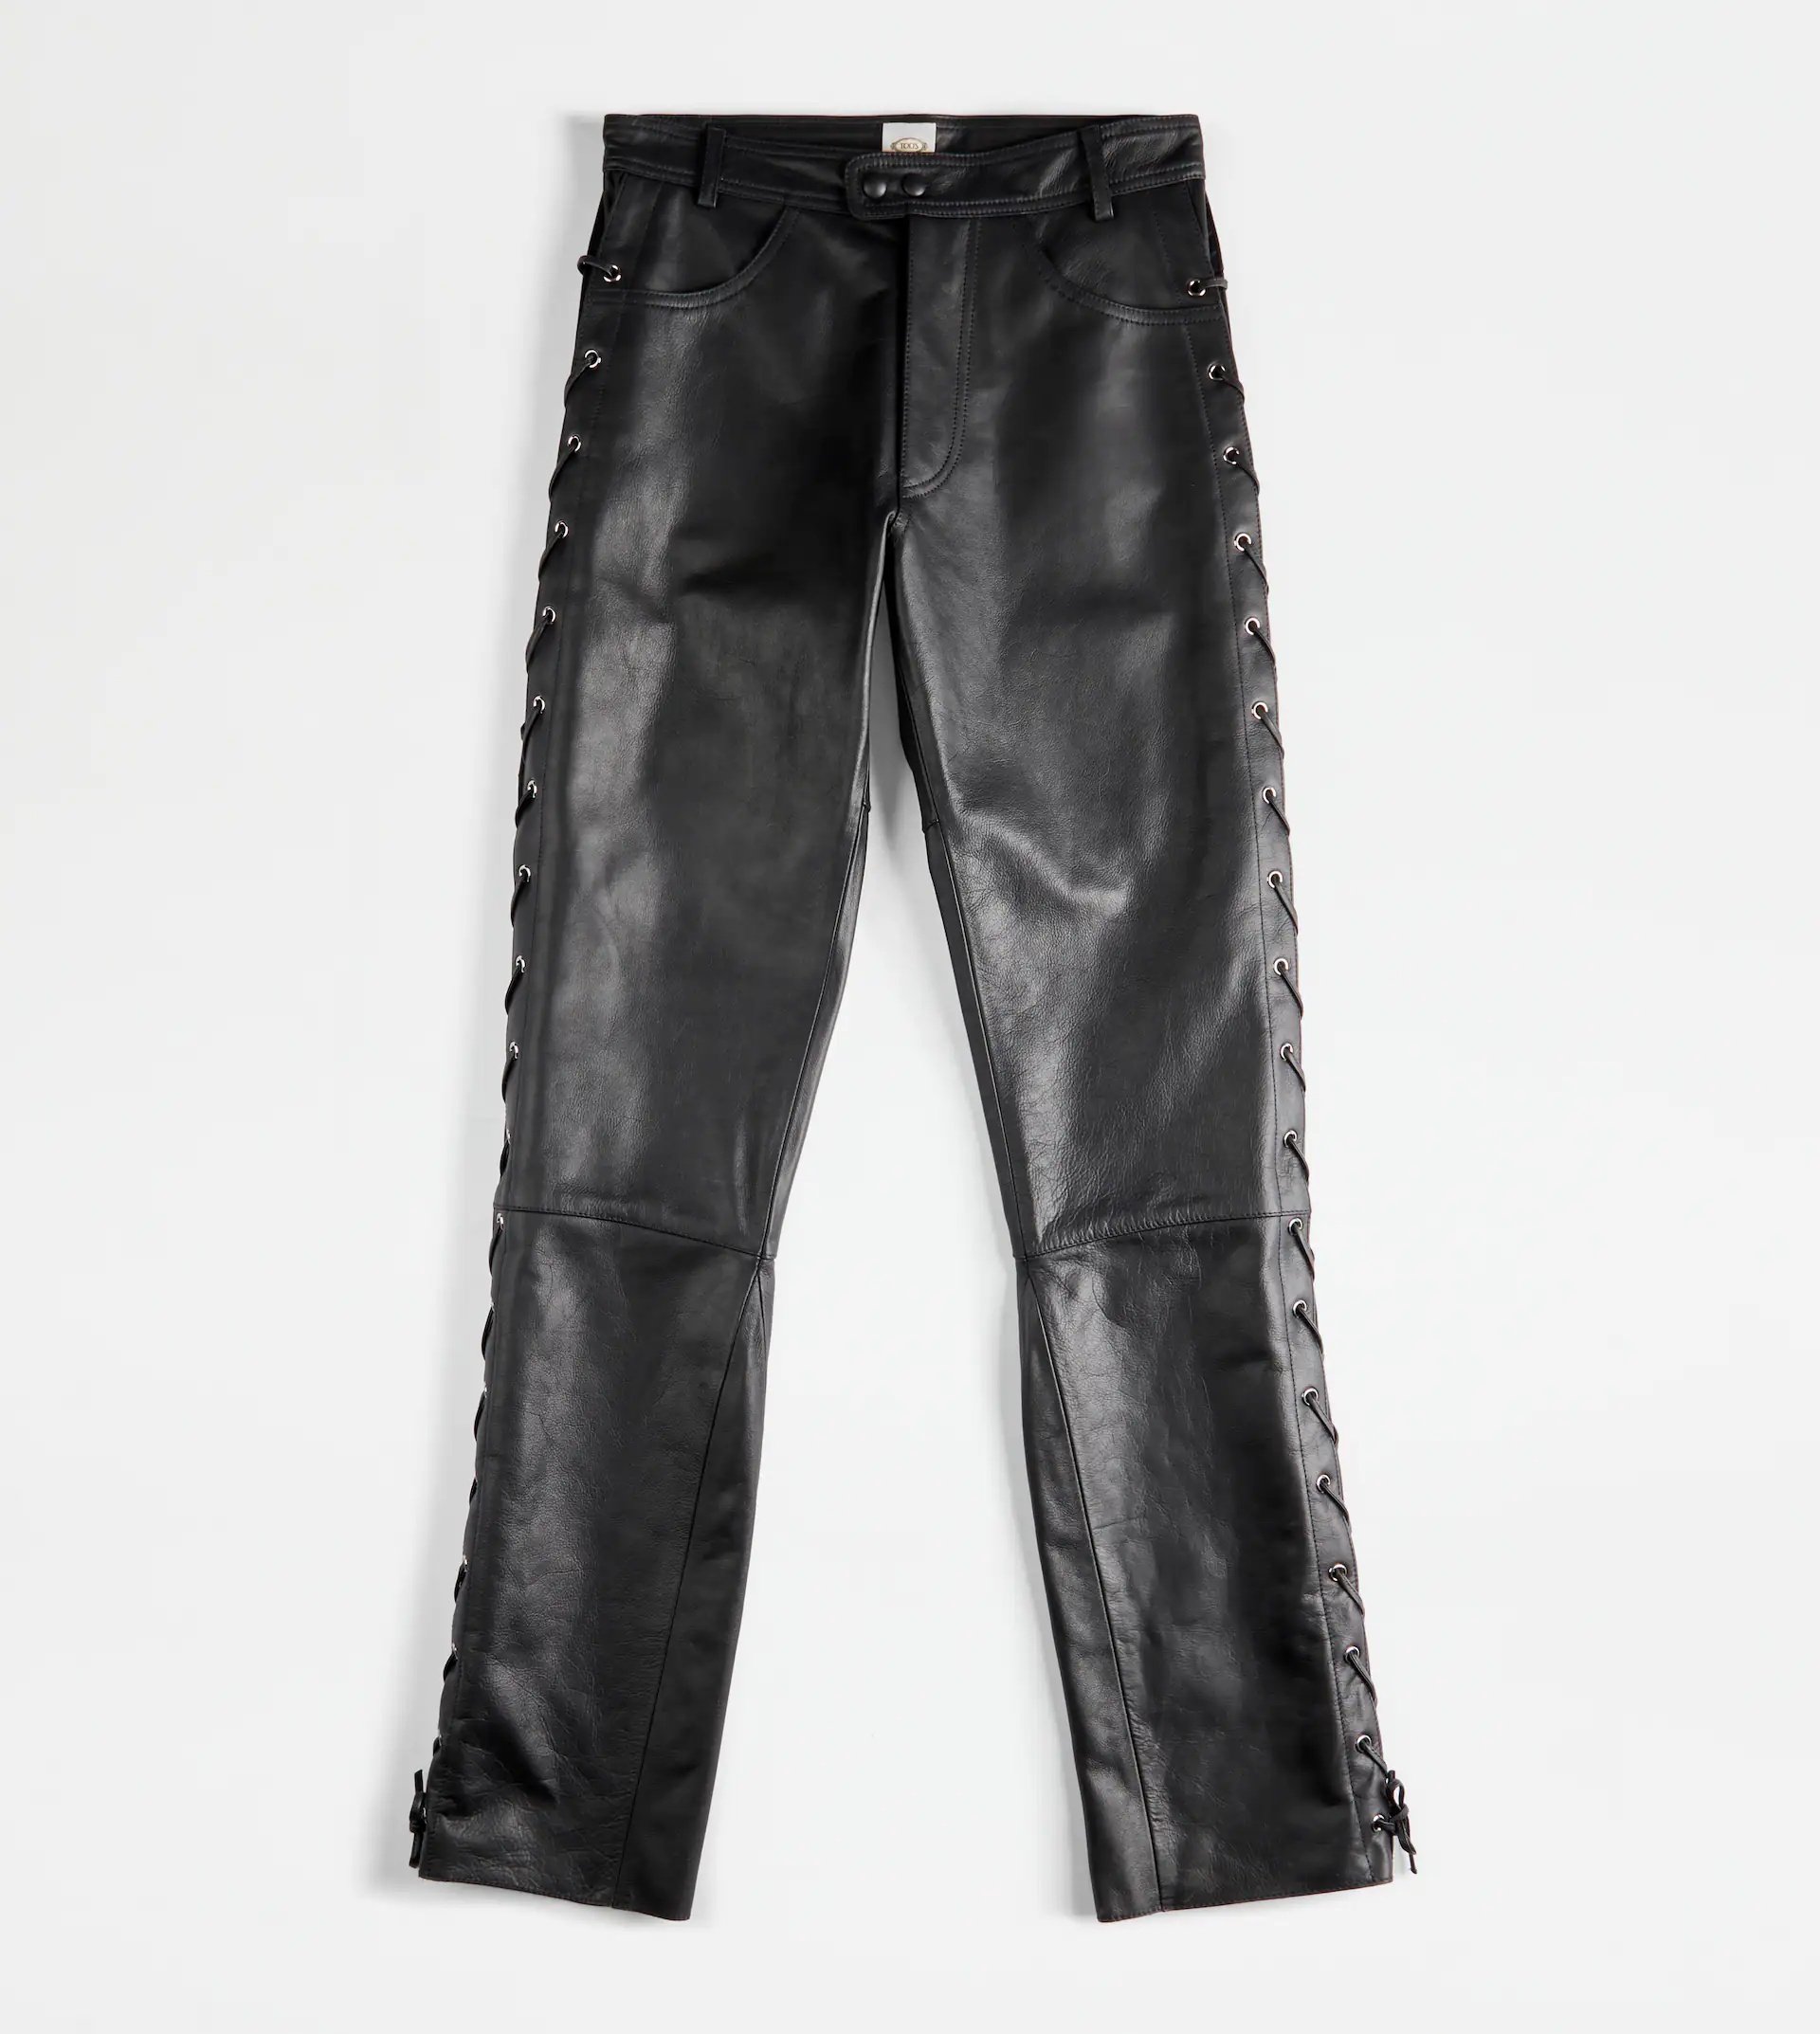 TOD'S TROUSERS IN LEATHER - BLACK - 1